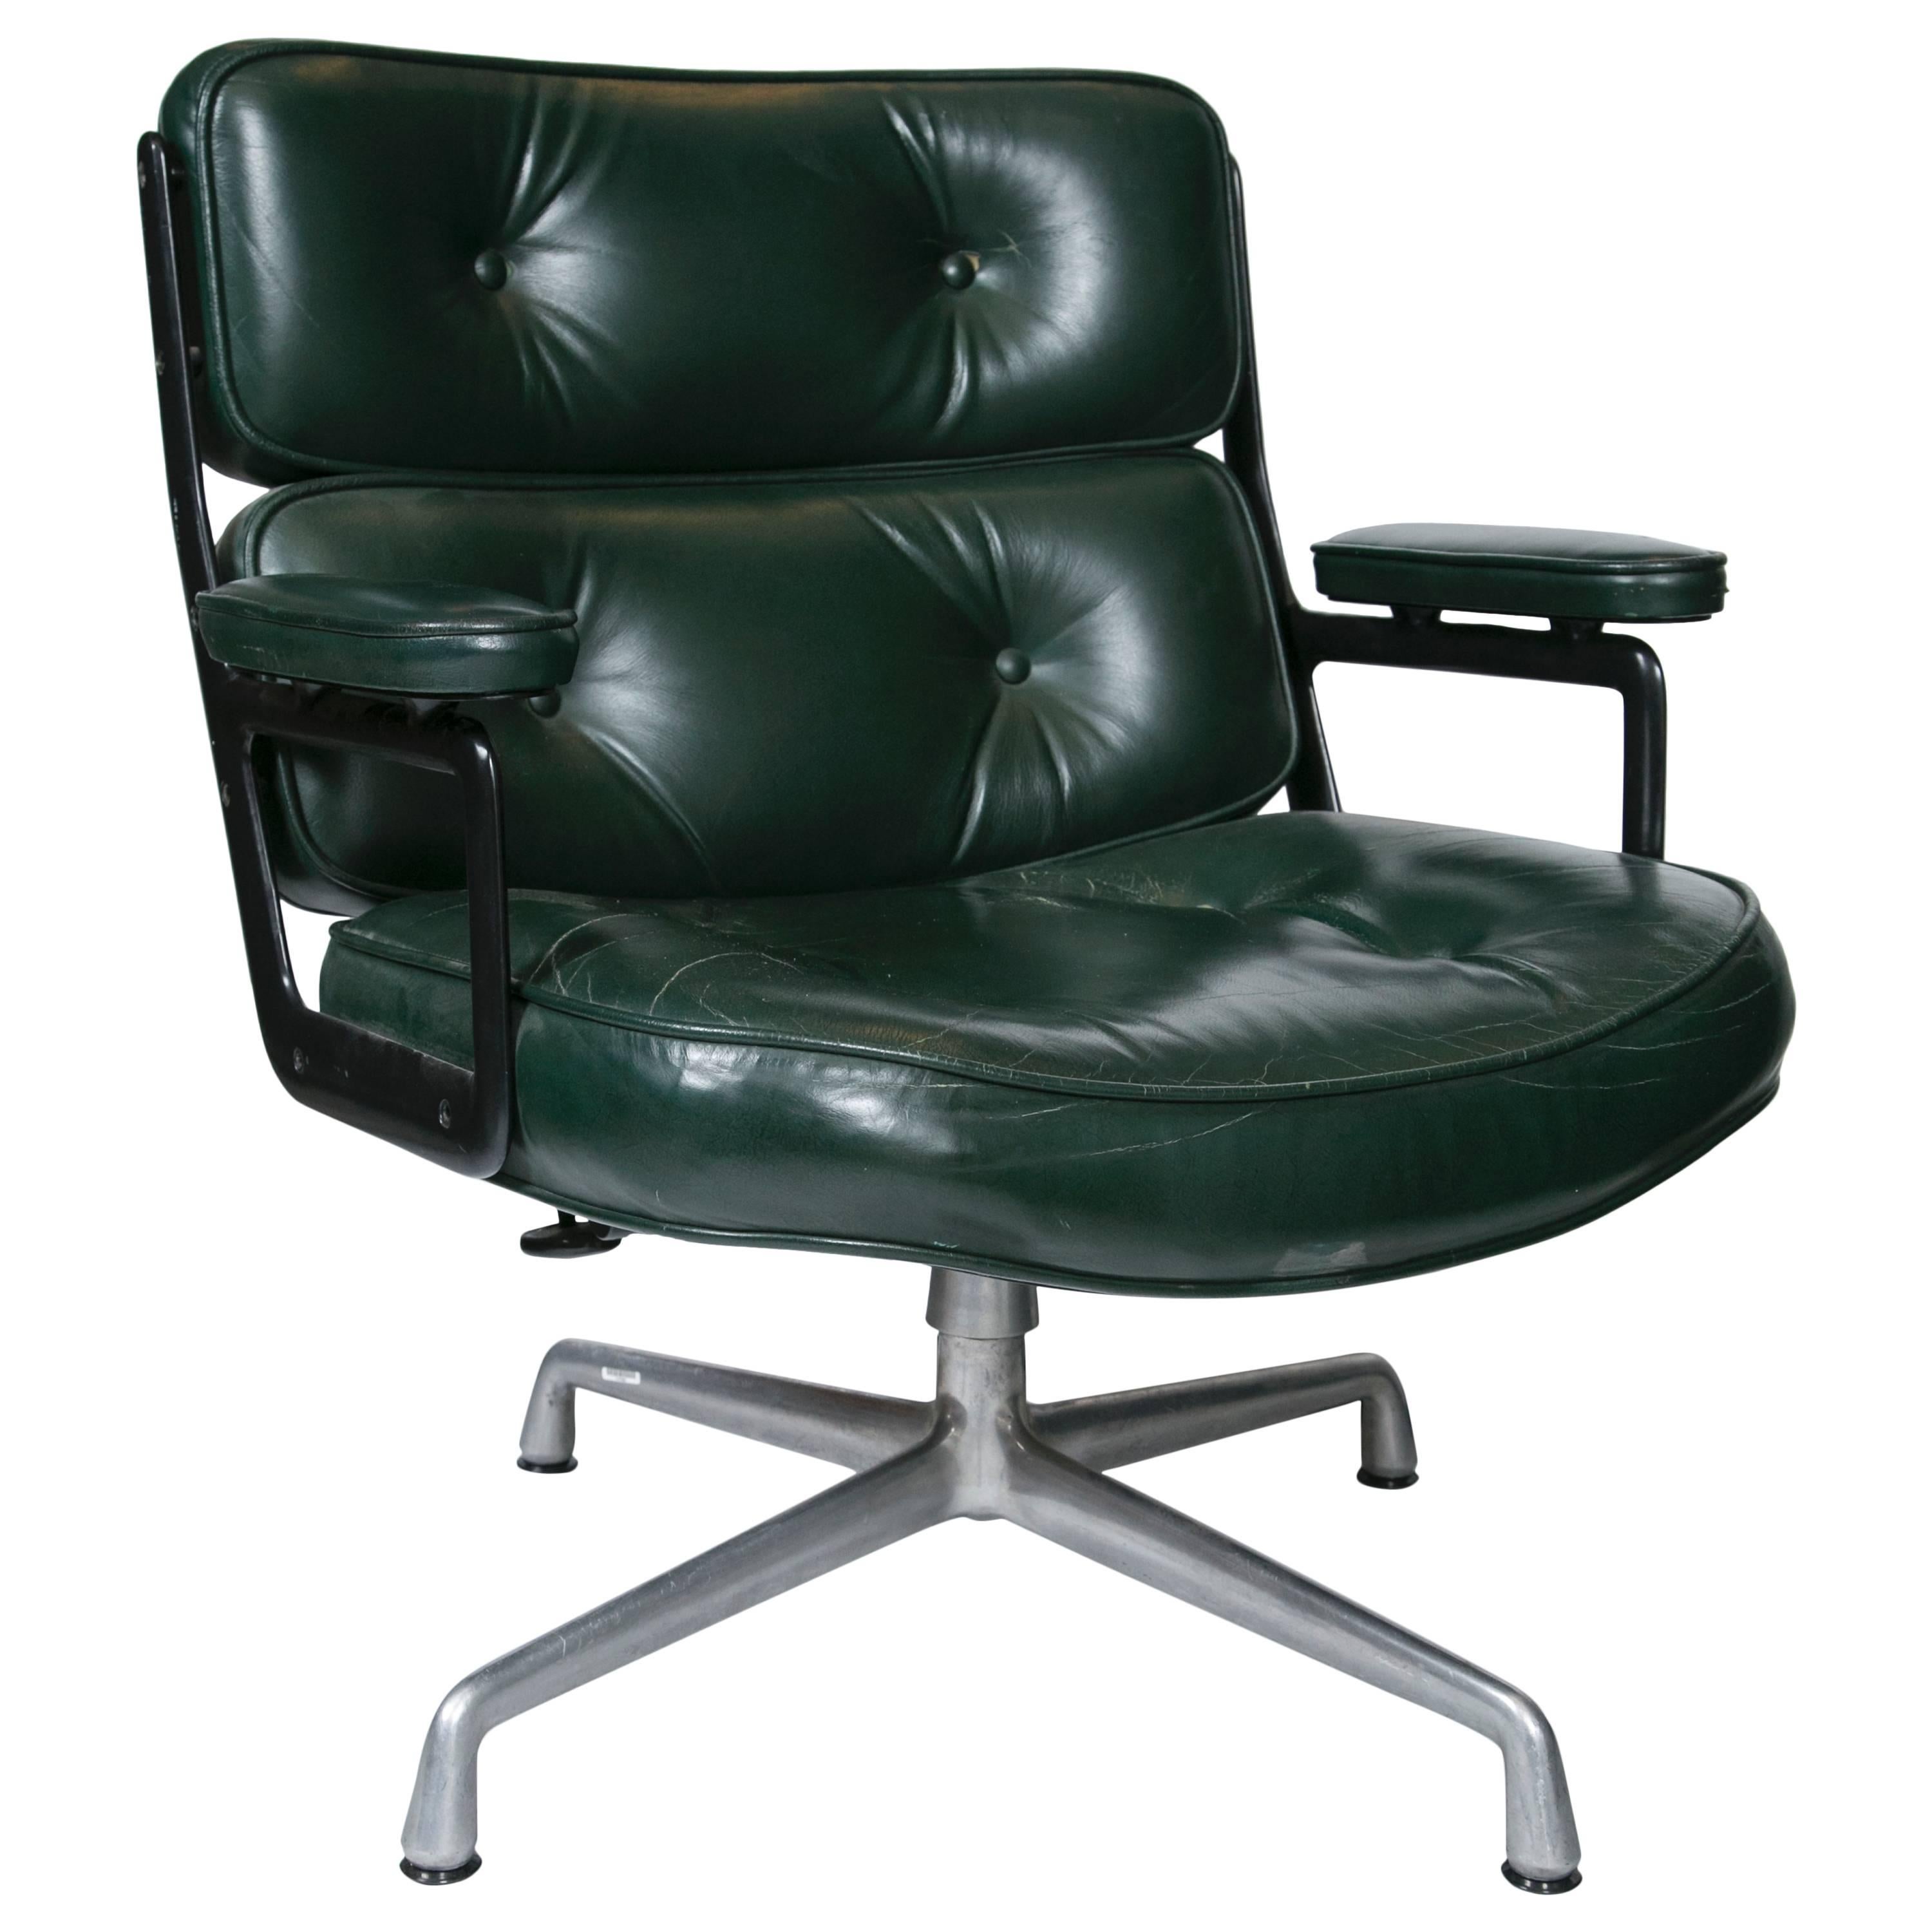 Eames Executive Lounge Chair by Herman Miller